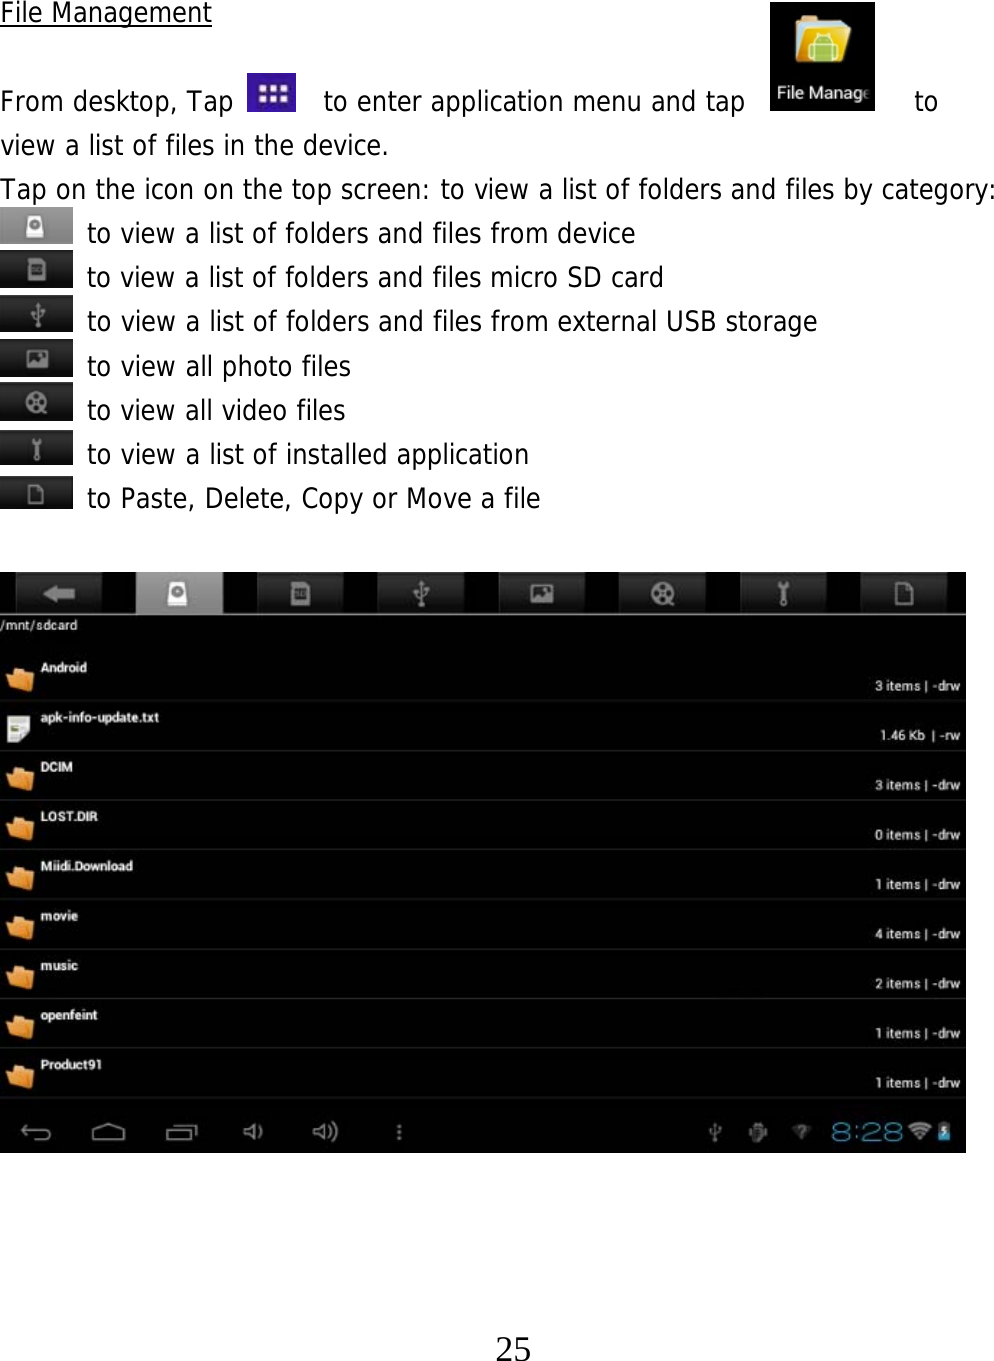   25 File Management  From desktop, Tap    to enter application menu and tap            to  view a list of files in the device.  Tap on the icon on the top screen: to view a list of folders and files by category:  to view a list of folders and files from device  to view a list of folders and files micro SD card  to view a list of folders and files from external USB storage  to view all photo files  to view all video files  to view a list of installed application  to Paste, Delete, Copy or Move a file                    